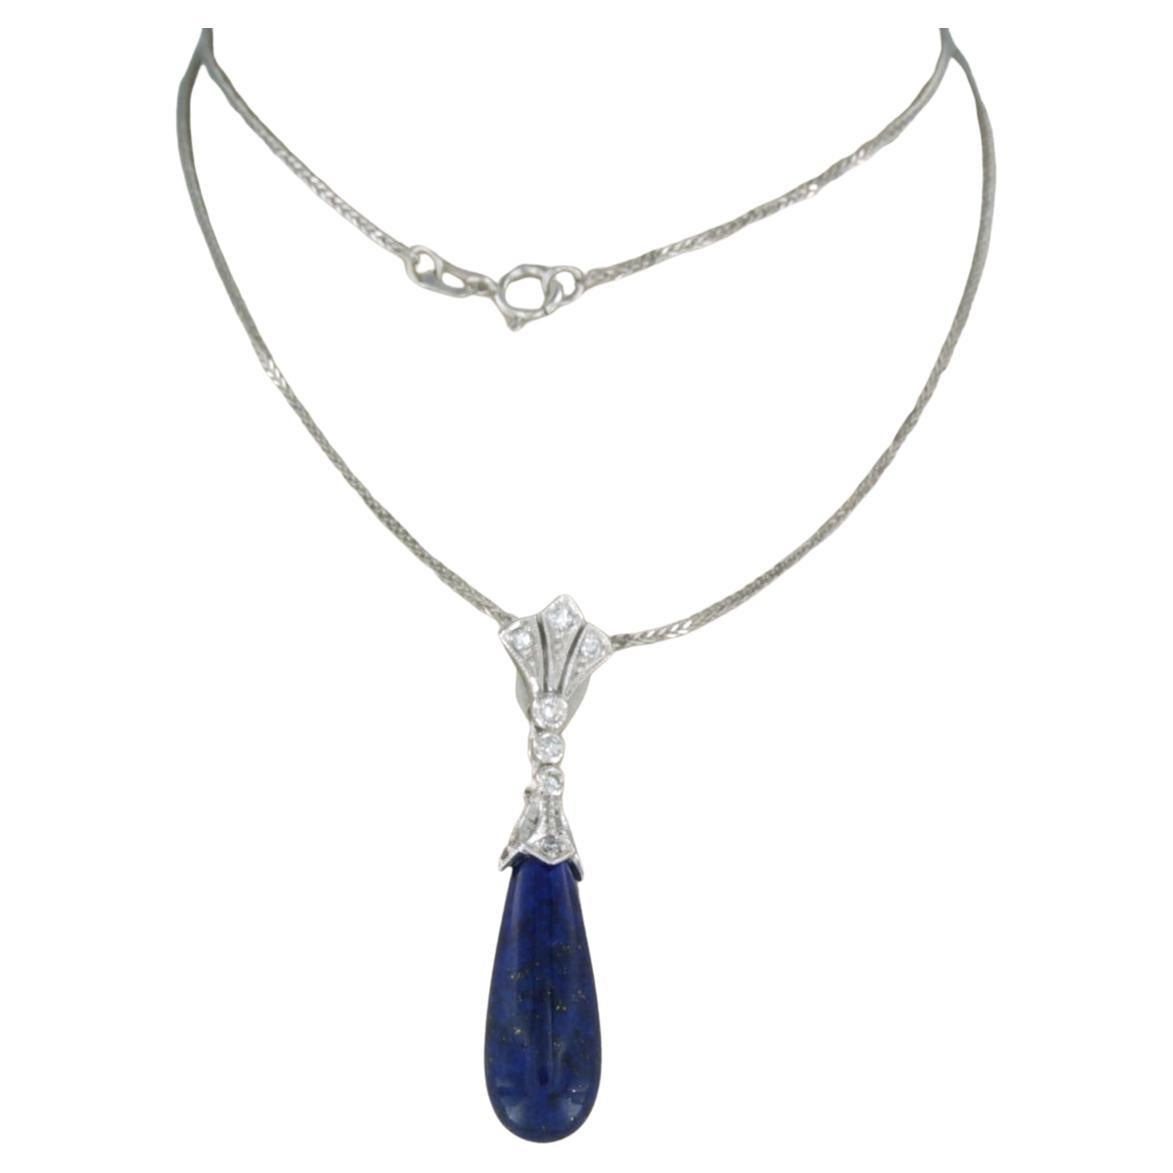 Necklace and pendant with lapis lazuli and diamonds 14k white gold